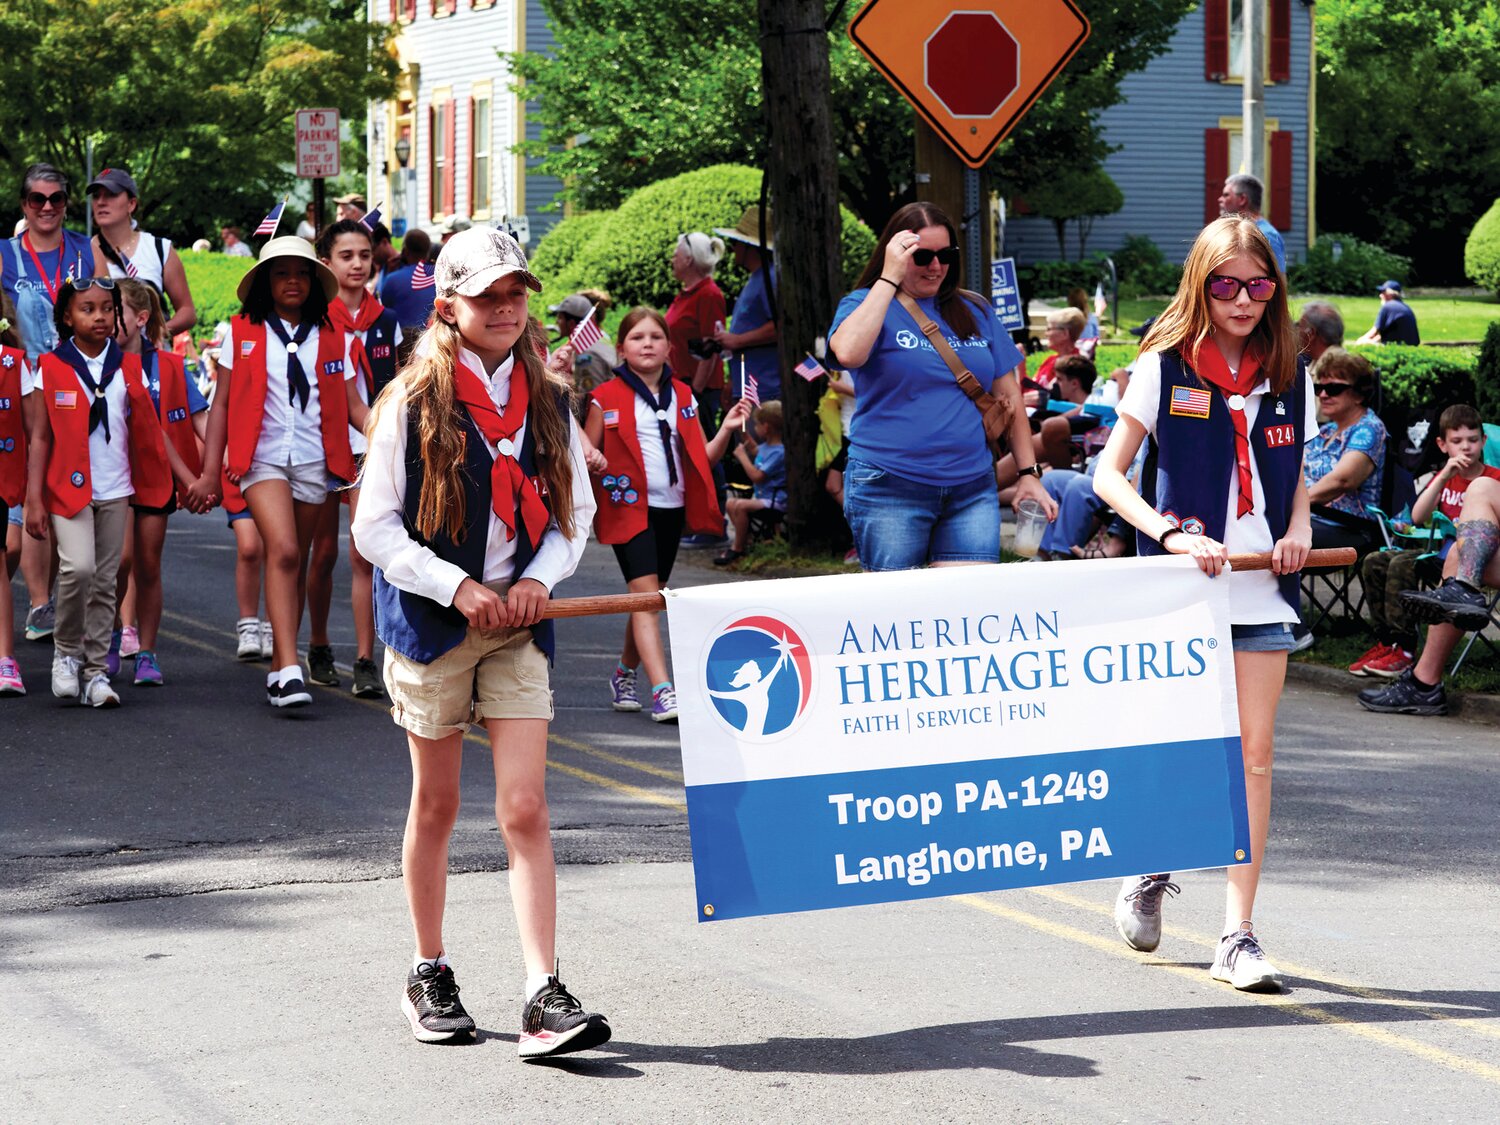 Members of American Heritage Girls Troop PA-1249 march in the parade.